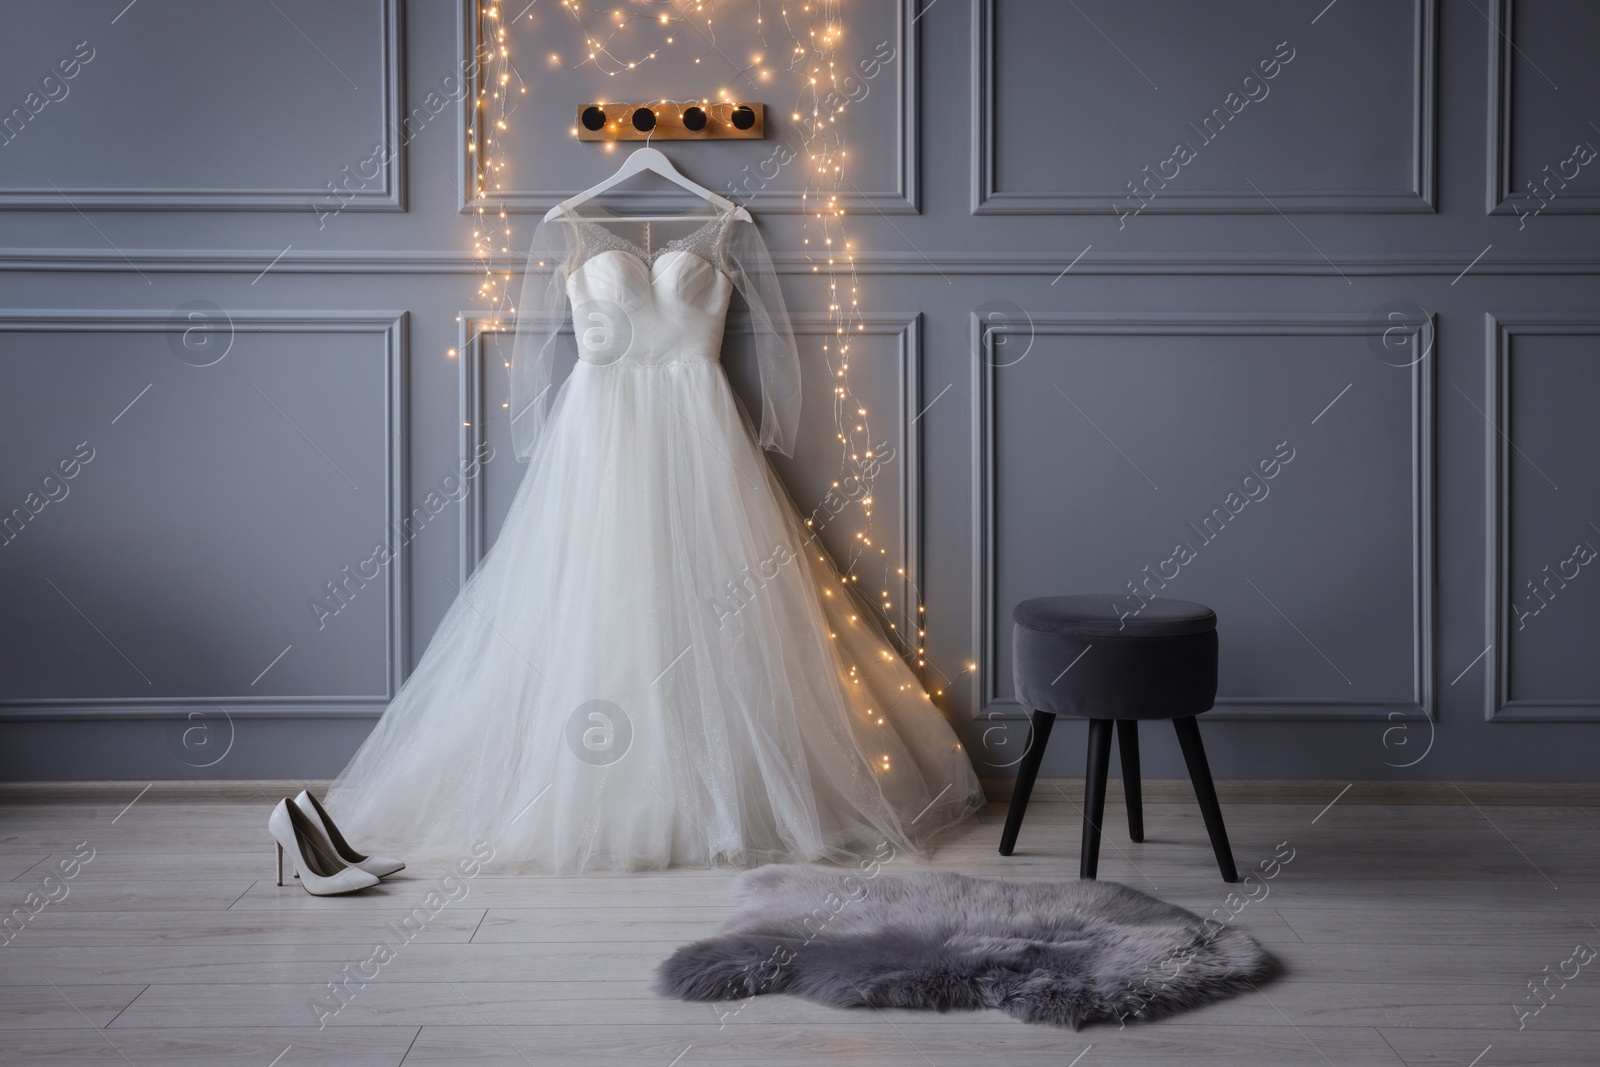 Photo of Fashionable long dress with transparent sleeves on hanger near festive lights and shoes in showroom. Preparing for party